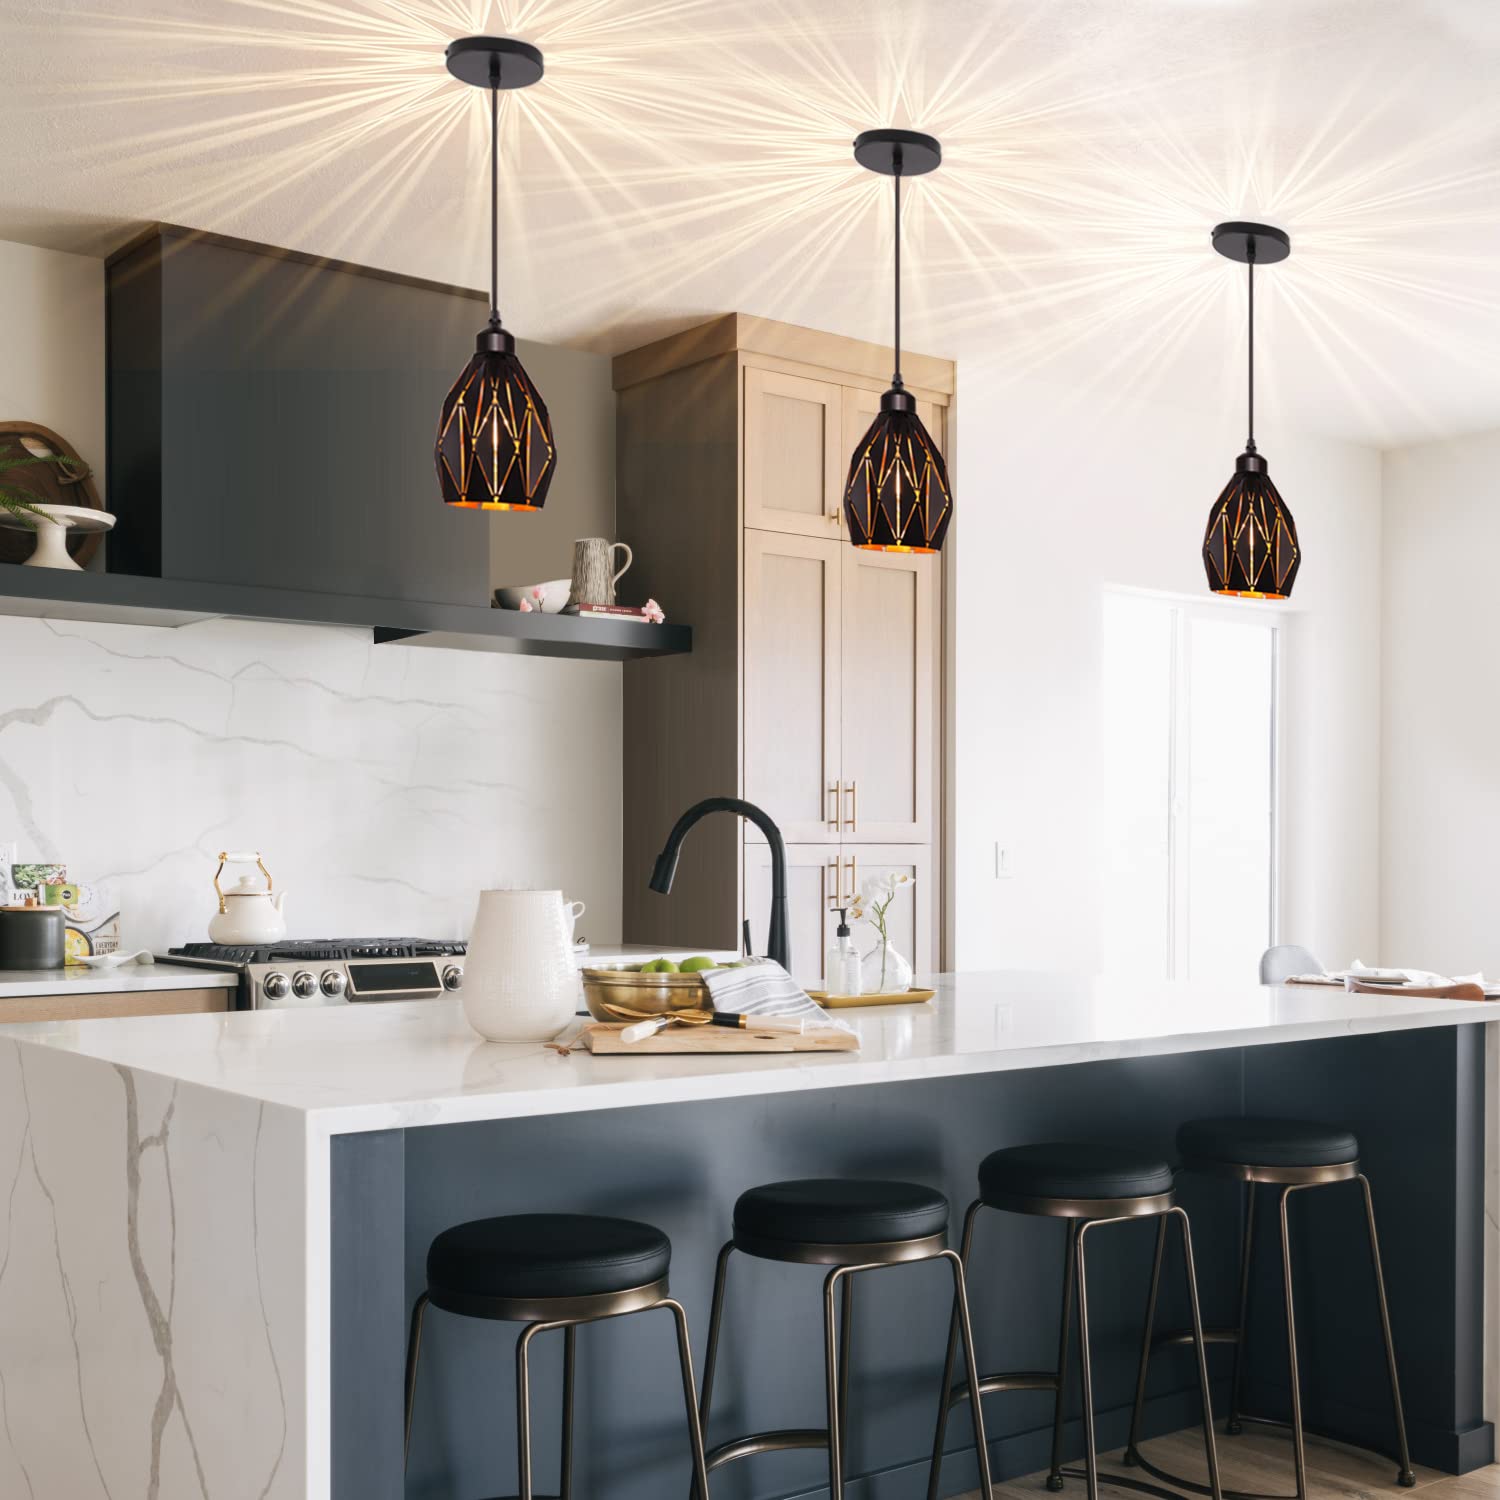 Retro Pendant Light Fixtures 3 Pack Industrial Pendant Lighting Adjustable Hanging Light Fixtures with Geometric Black Metal Shade Farmhouse Pendant Light Ceiling Lamp for Kitchen Island